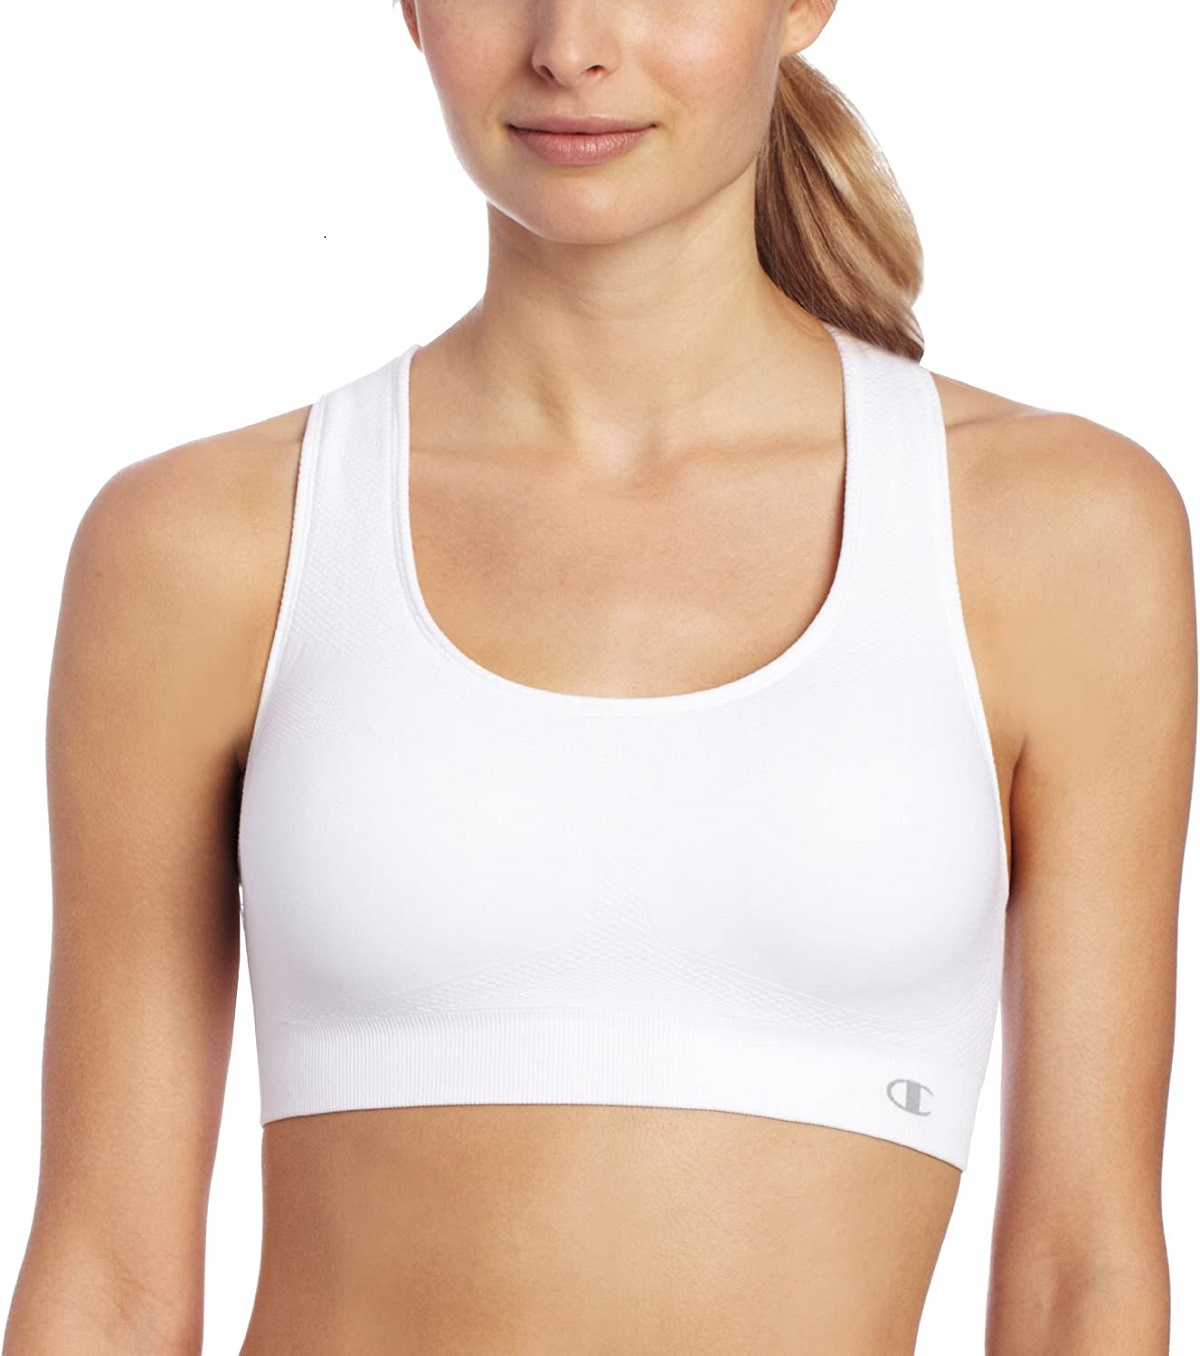 Why Does Adidas Sports Bras Bare breasts  Support Your Breasts Better?